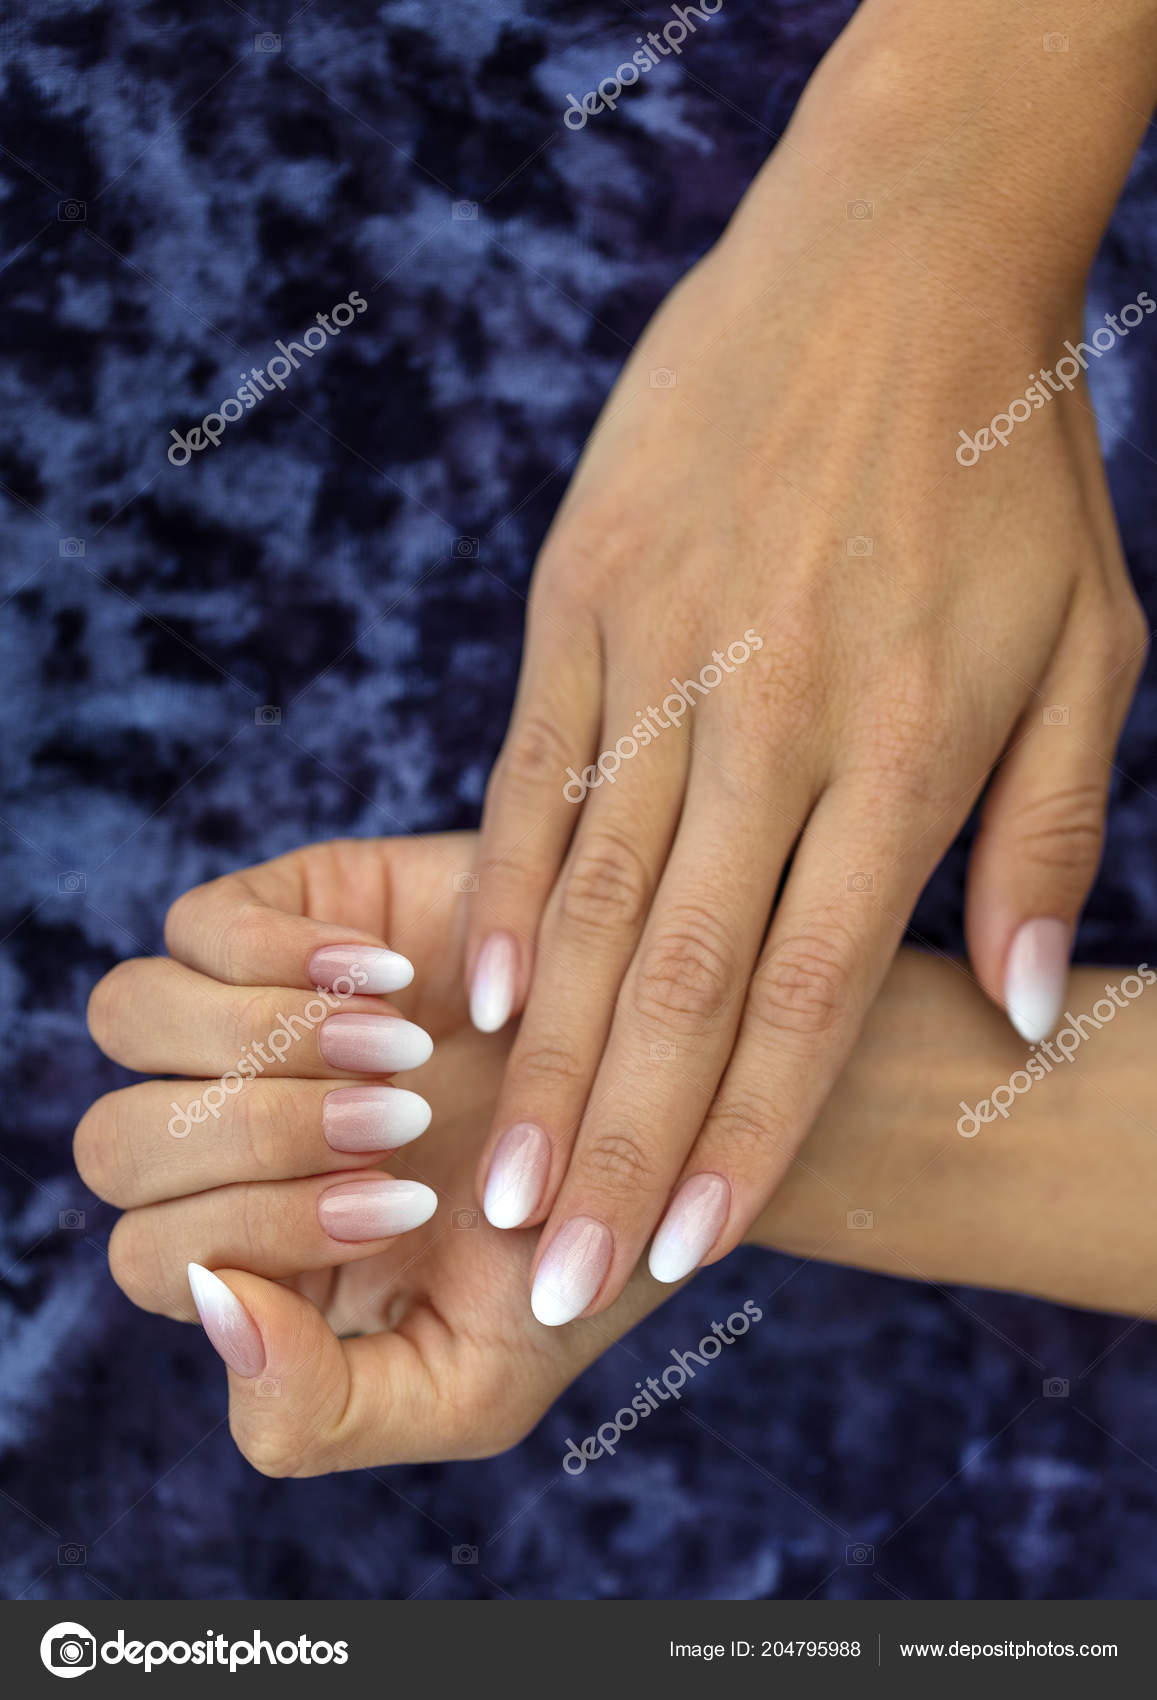 Pictures Ombre Nails Beautiful Woman Nails Beautiful French Manicure Ombre Peach White Stock Photo C Photosergii Gmail Com 204795988